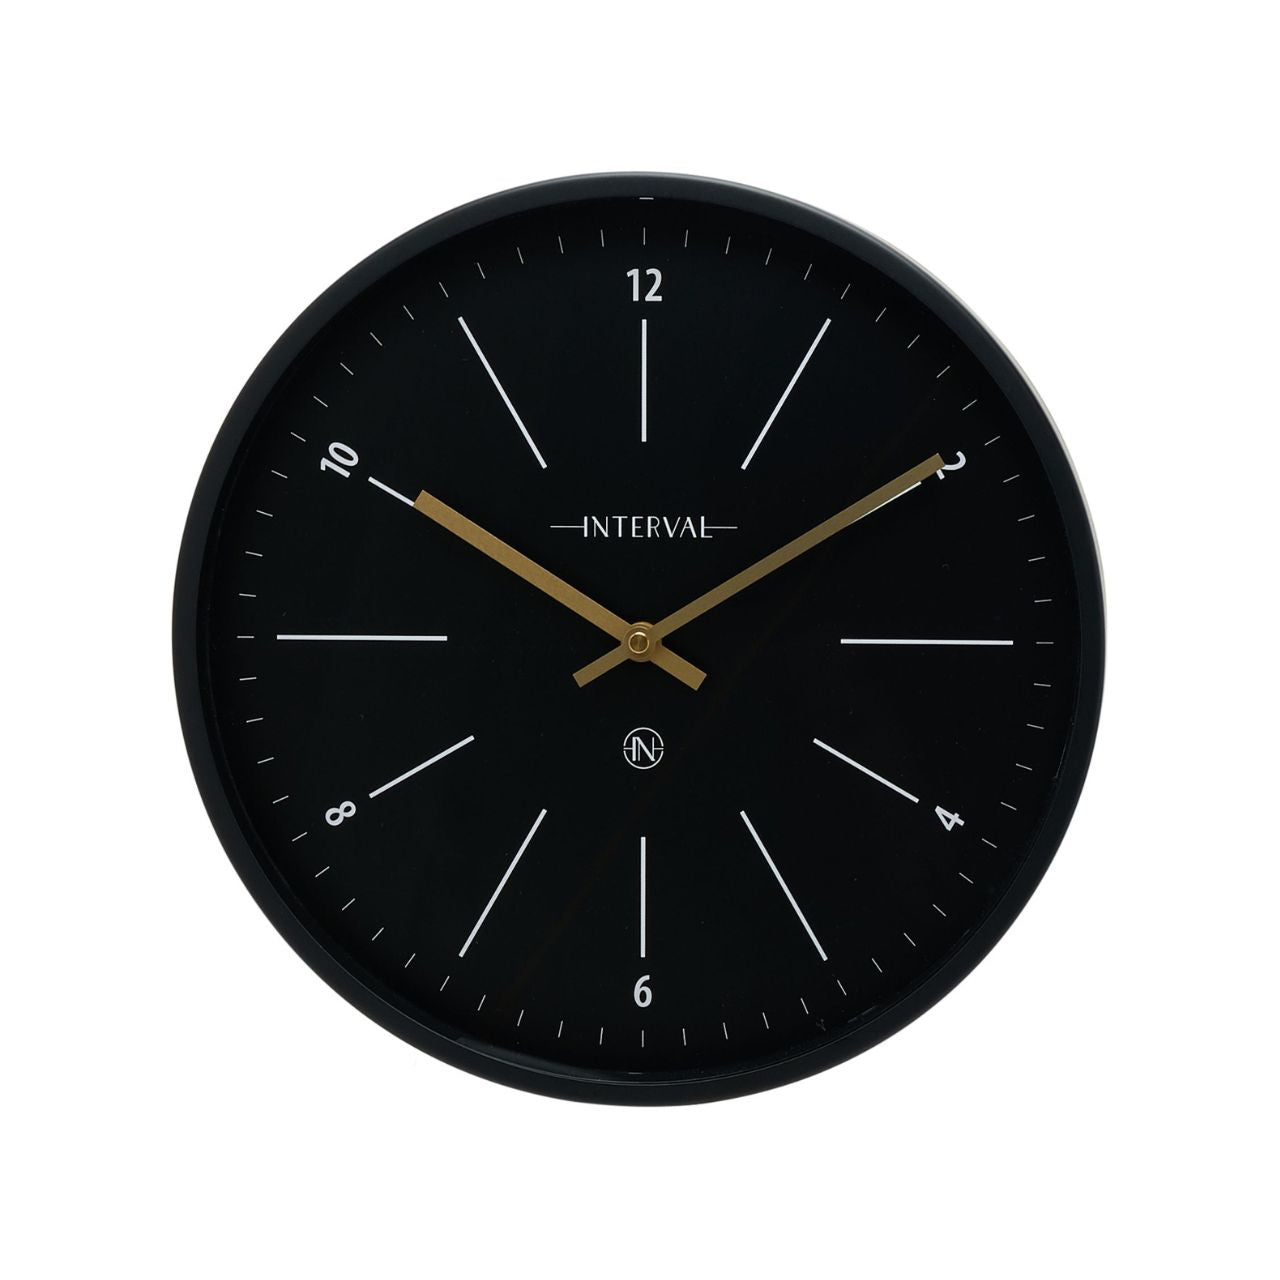 Introducing the Interval Metal Wall Clock in Black, a sleek and contemporary timepiece that combines functionality with modern design.